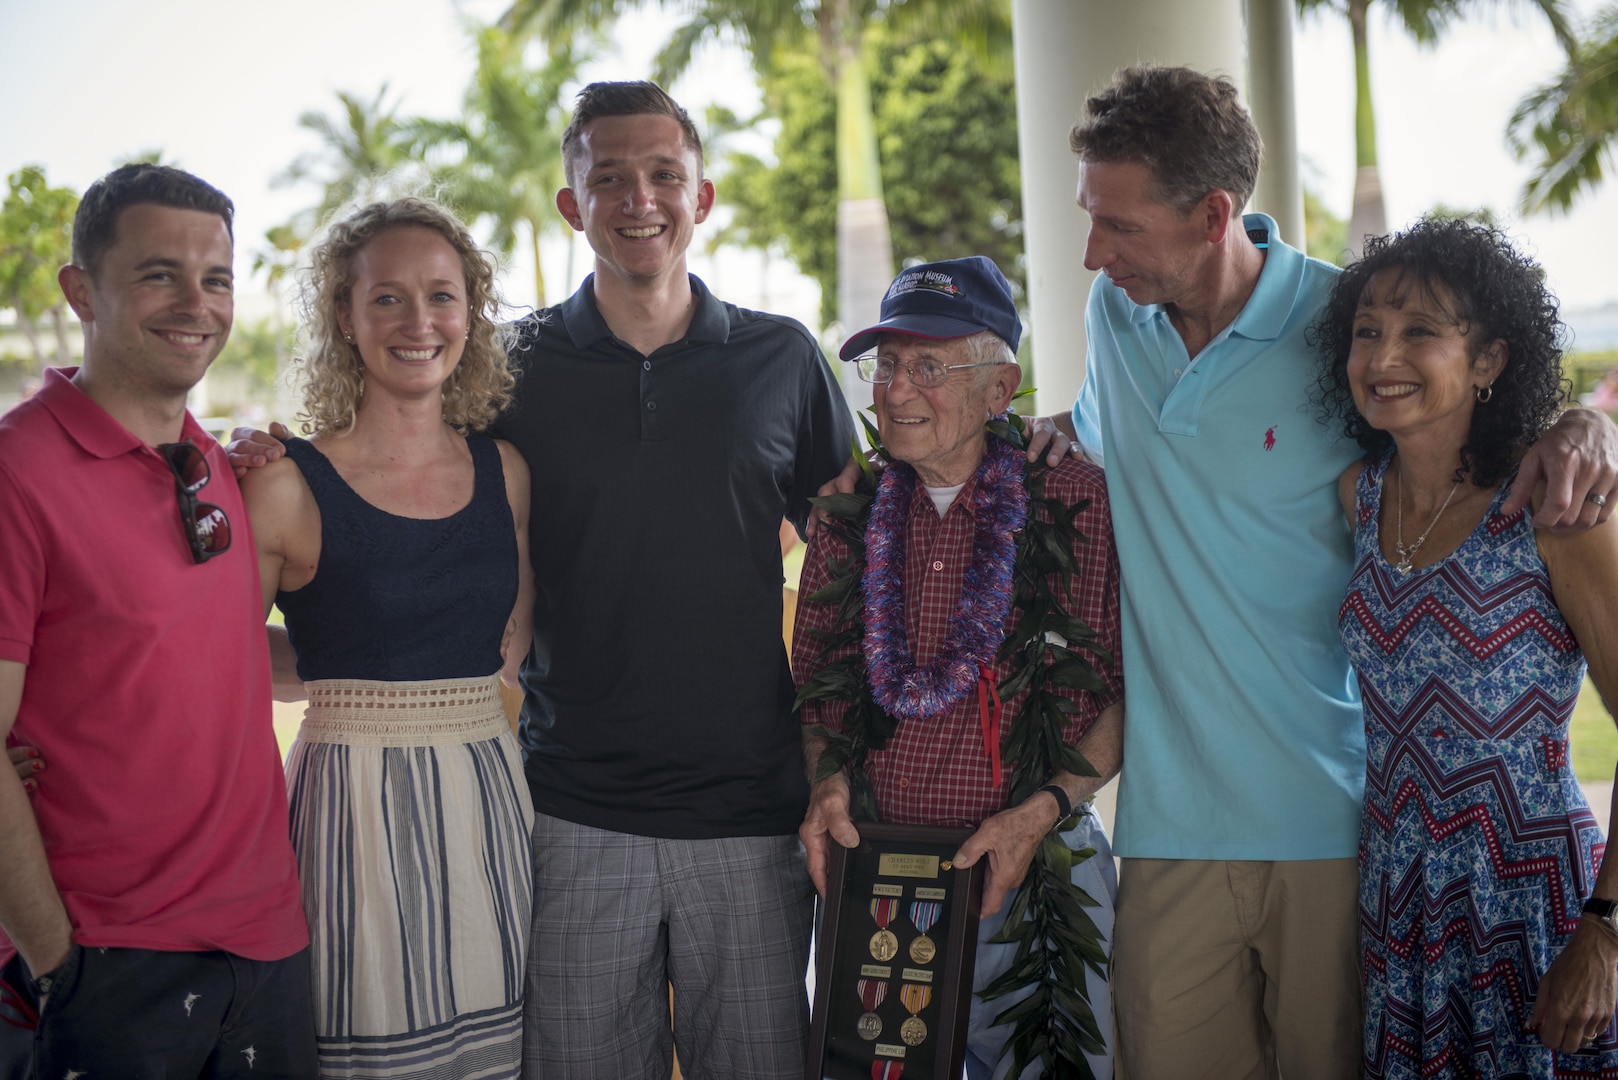 Charles Wolf, a World War ll veteran, stands with his family at the Pearl Harbor Education Center, Hawaii, May 6, 2016. Wolf was a part of a surprise ceremony held in his honor, where he was presented a shadow box containing awards and medals he had never received during his service in the U.S. Army, 72 years ago. The awards were presented by Brig. Gen. Mark Spindler, Deputy Director of the Defense POW/MIA Accounting Agency (DPAA), in an official ceremony, to thank Wolf for all the sacrifices he made to this country so many years ago. DPAA's mission is to provide the fullest possible accounting for our missing personnel to their families and the nation. (DoD photo by MC2 Aiyana Paschal/RELEASED)
